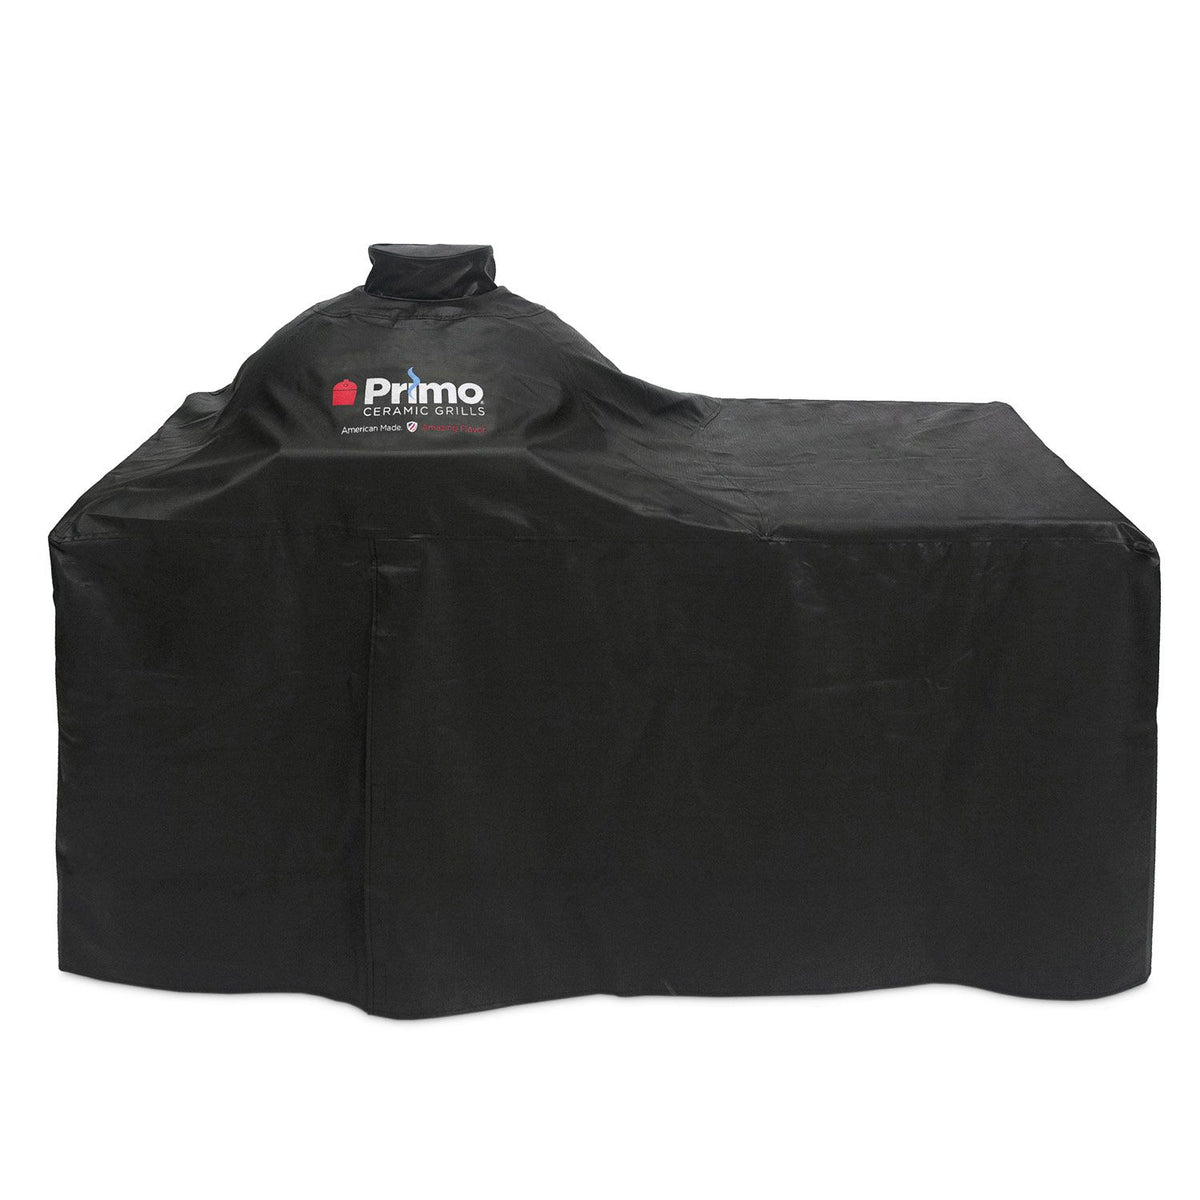 Primo LG 300 or JR 200 with Countertop Table Grill Cover